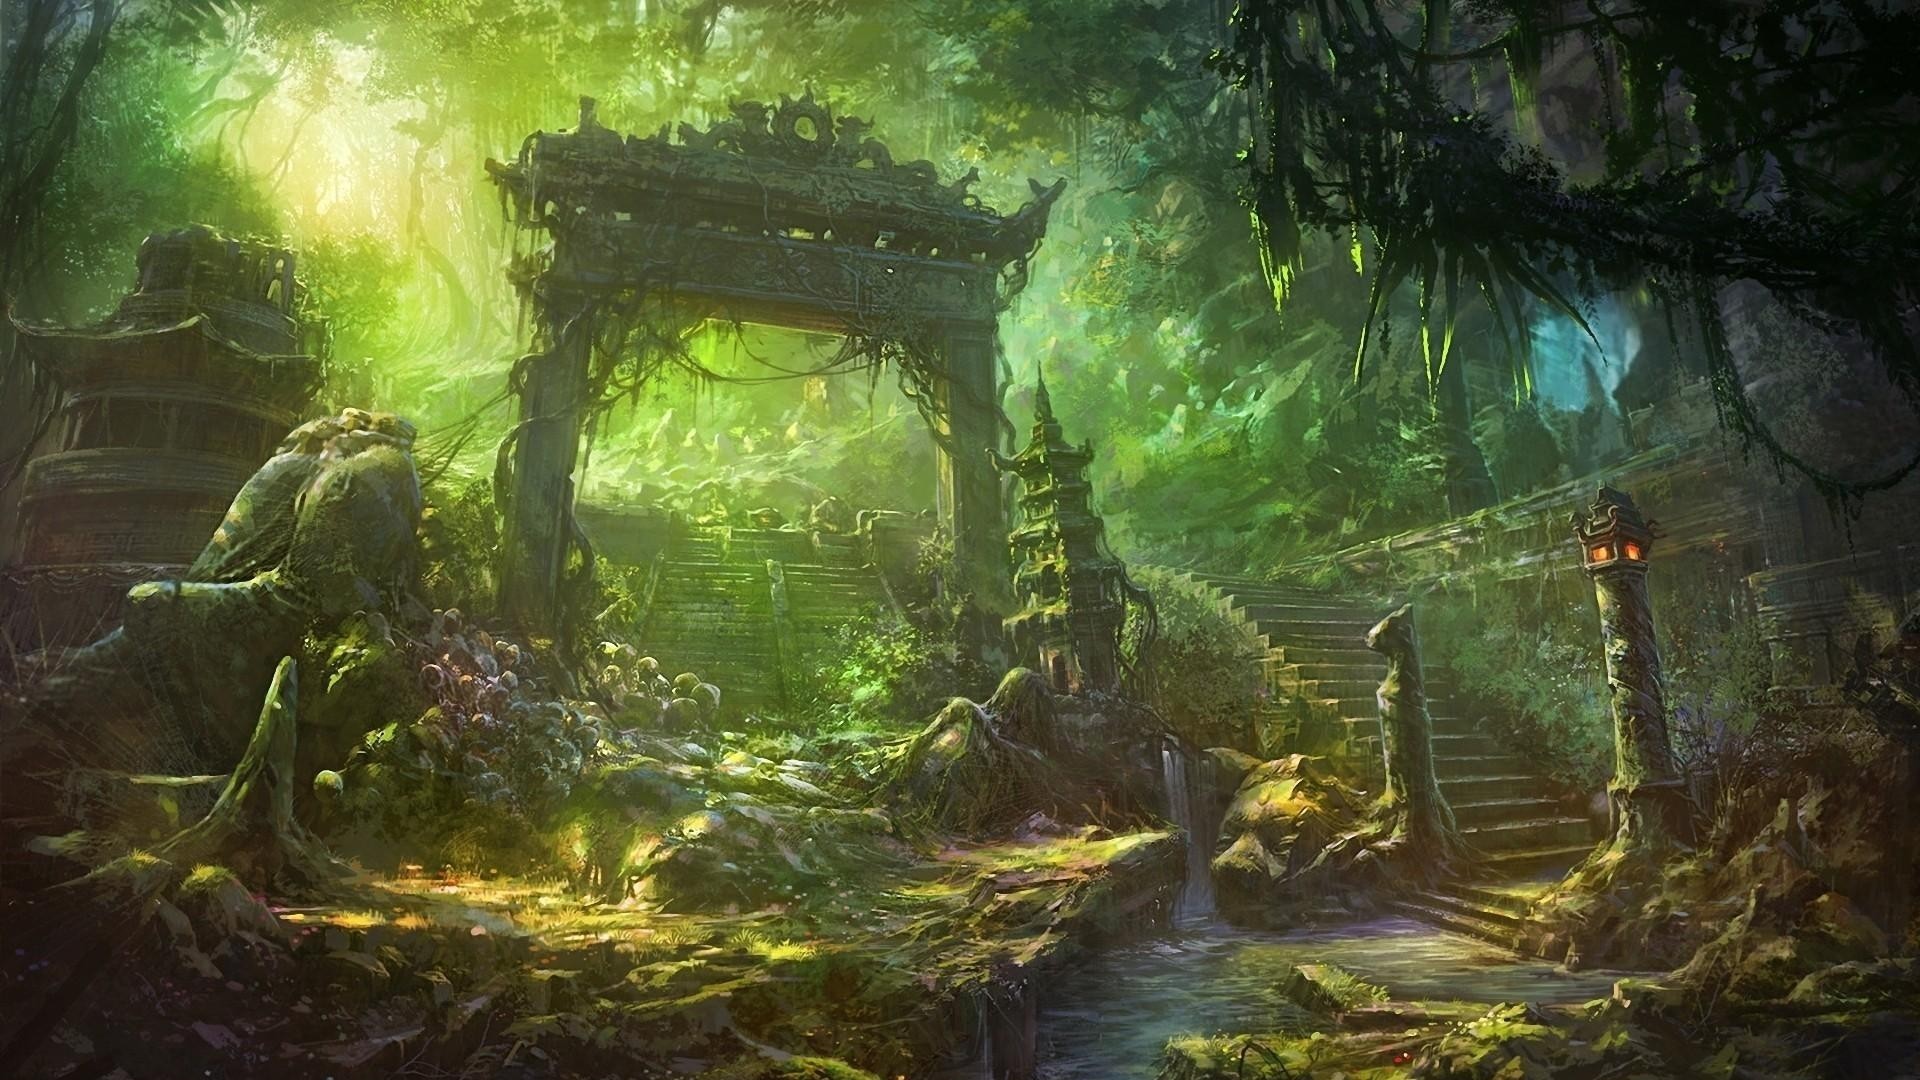 1920x1080 Ancient - GREENWAY ARCH Staircase Forest Overgrown Debris FANTASY ARCHWAY  Best Wallpapers for HD 16: